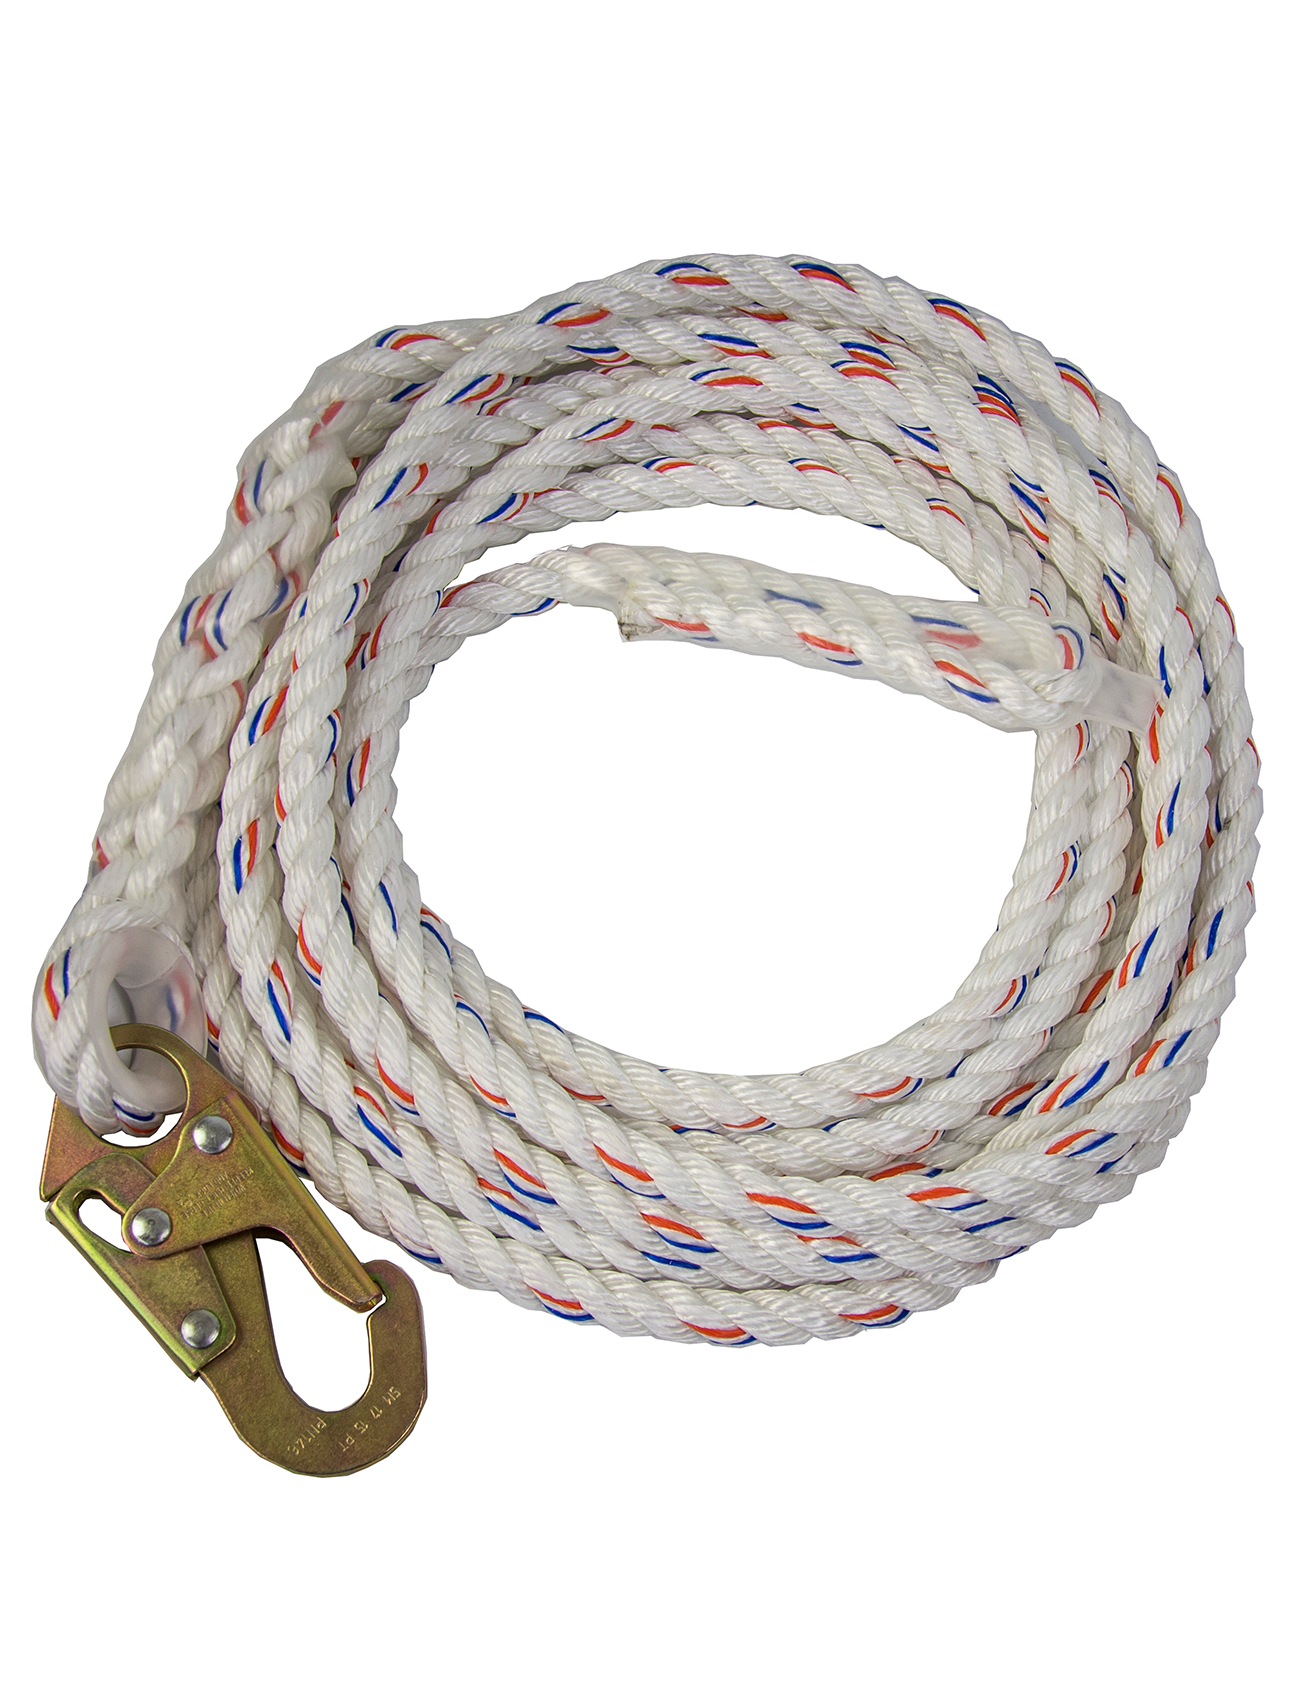 Guardian 11330 - White Polydac Rope with Snap Hook End - 30'L